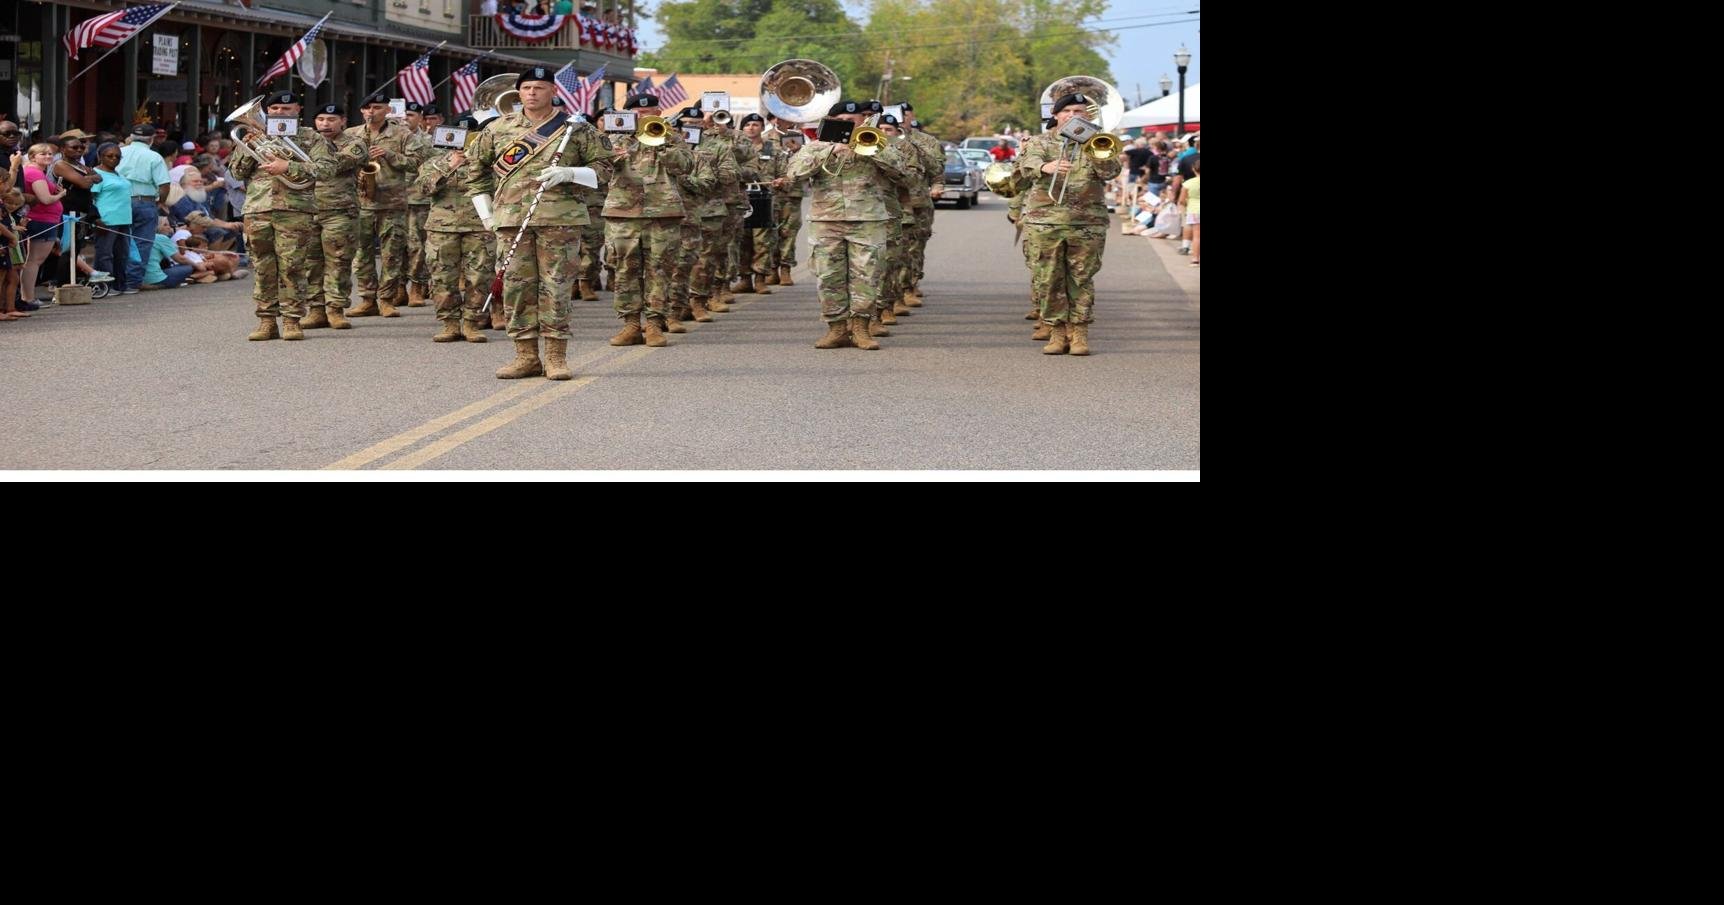 MCoE Band from Fort Benning will march, play in Fort Oglethorpe parade